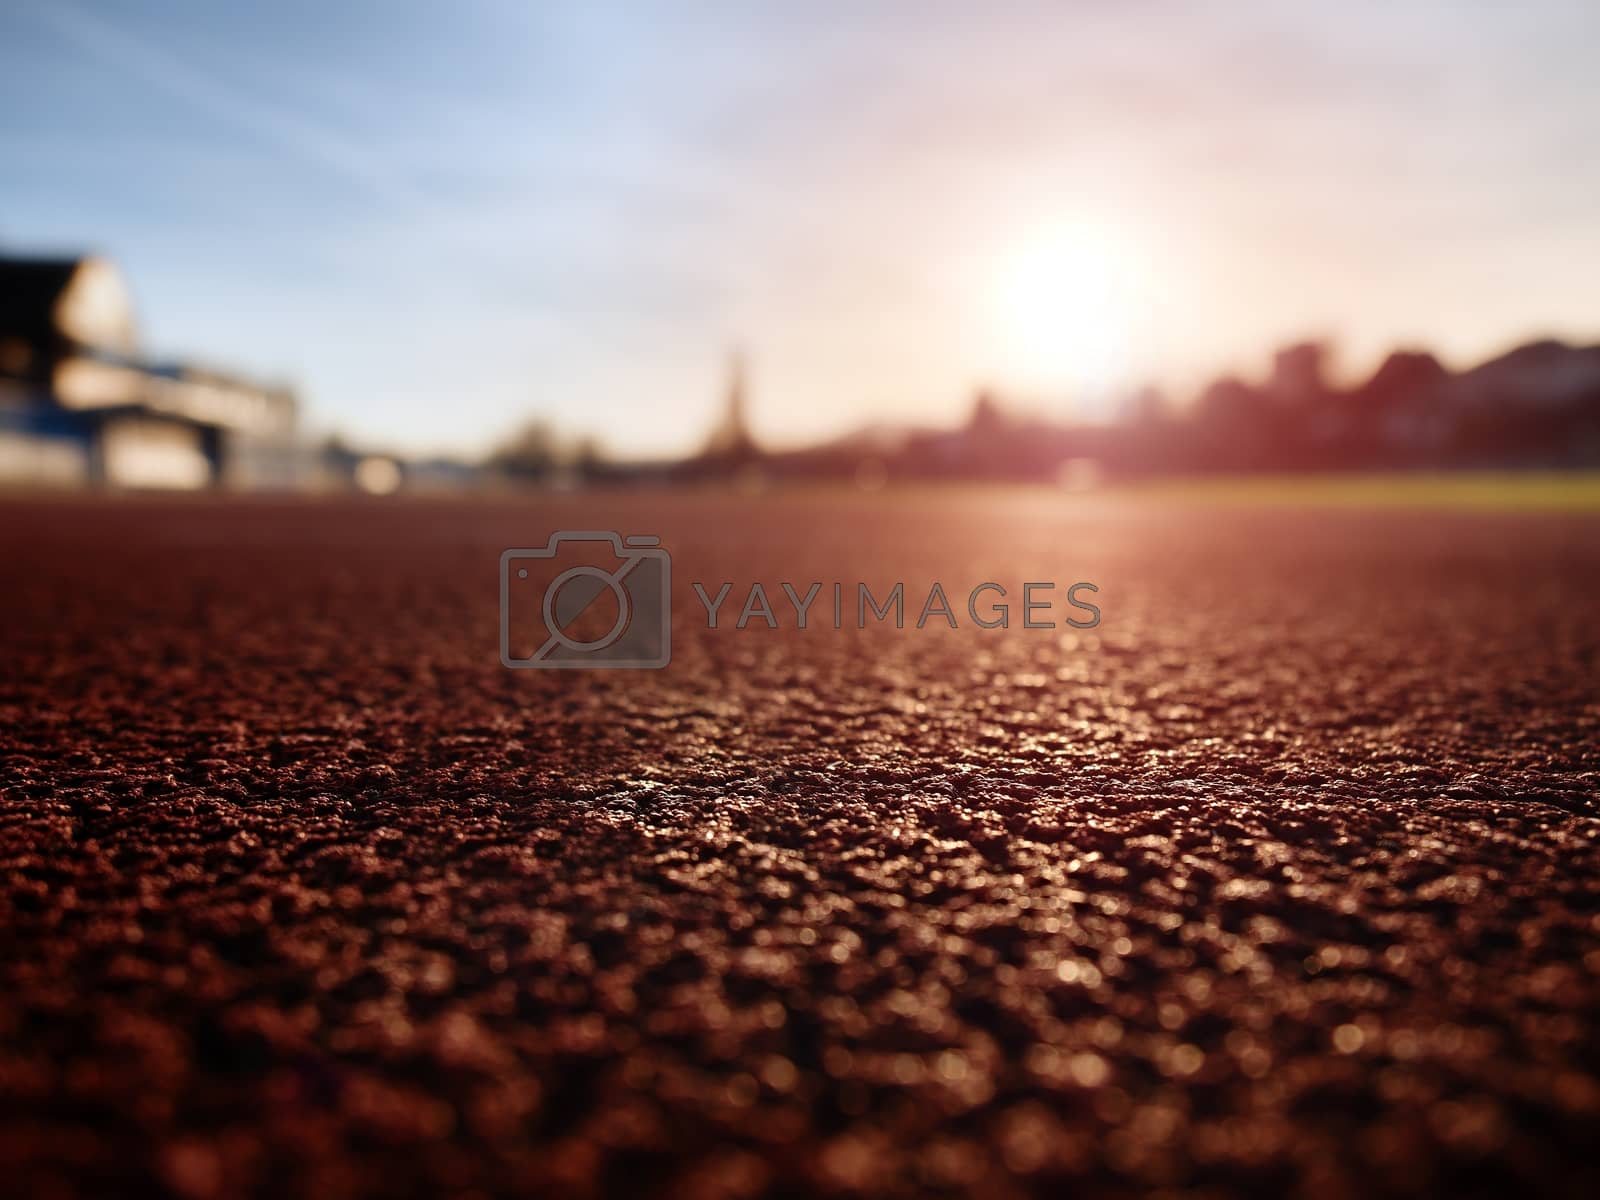 Royalty free image of Close up red racetrack ground on outdoor stadium by rdonar2